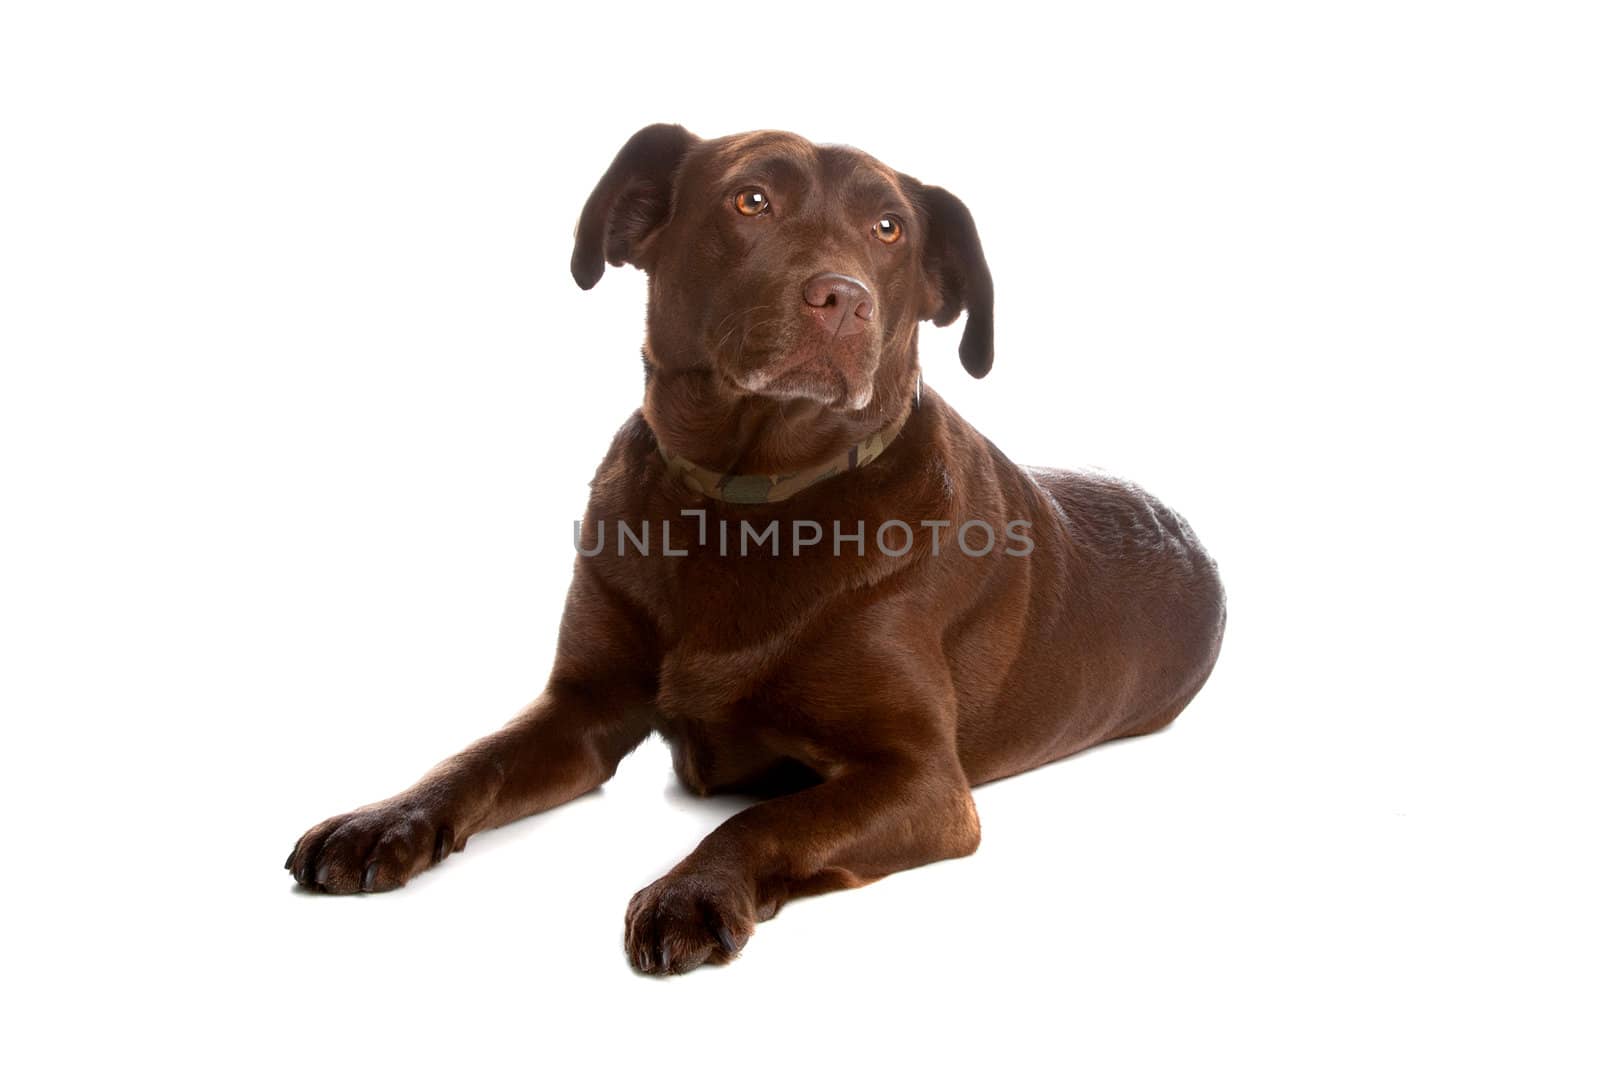 Chocolate labrador retriever dog lying and looking away, isolated on a white background.